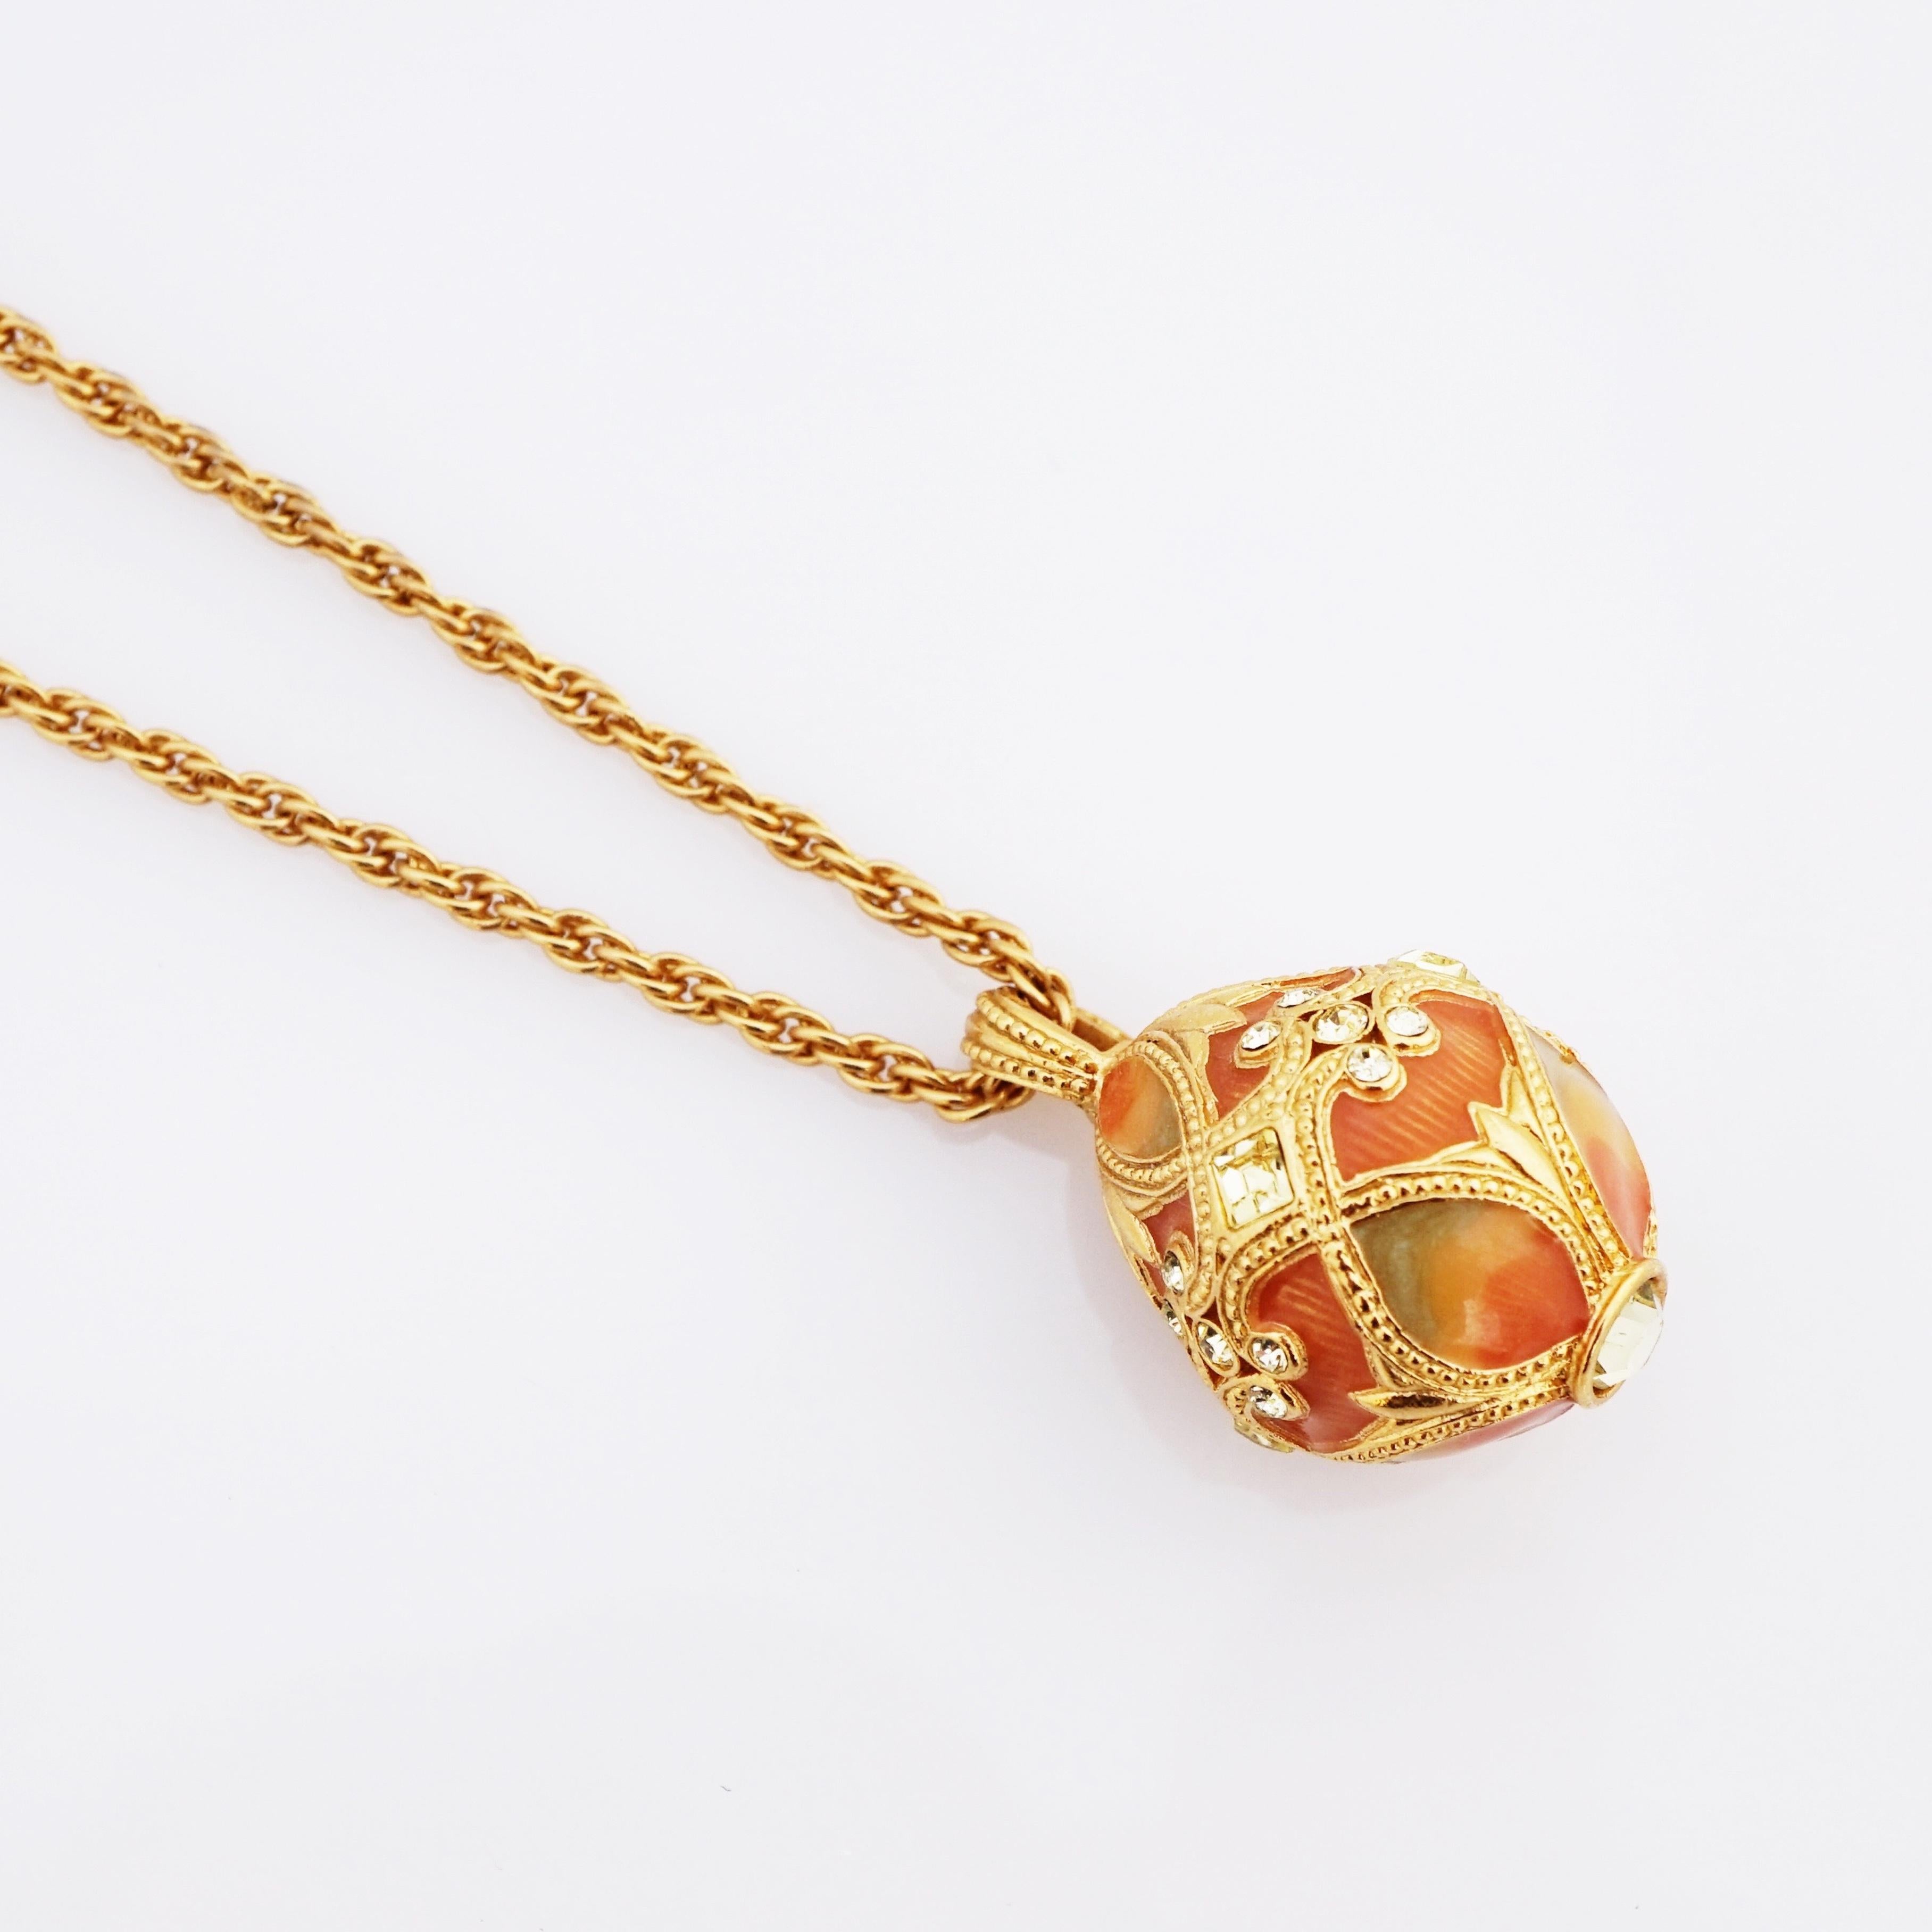 Modern Enameled Egg Pendant Necklace With Rhinestone Accents By Joan Rivers, 1990s For Sale